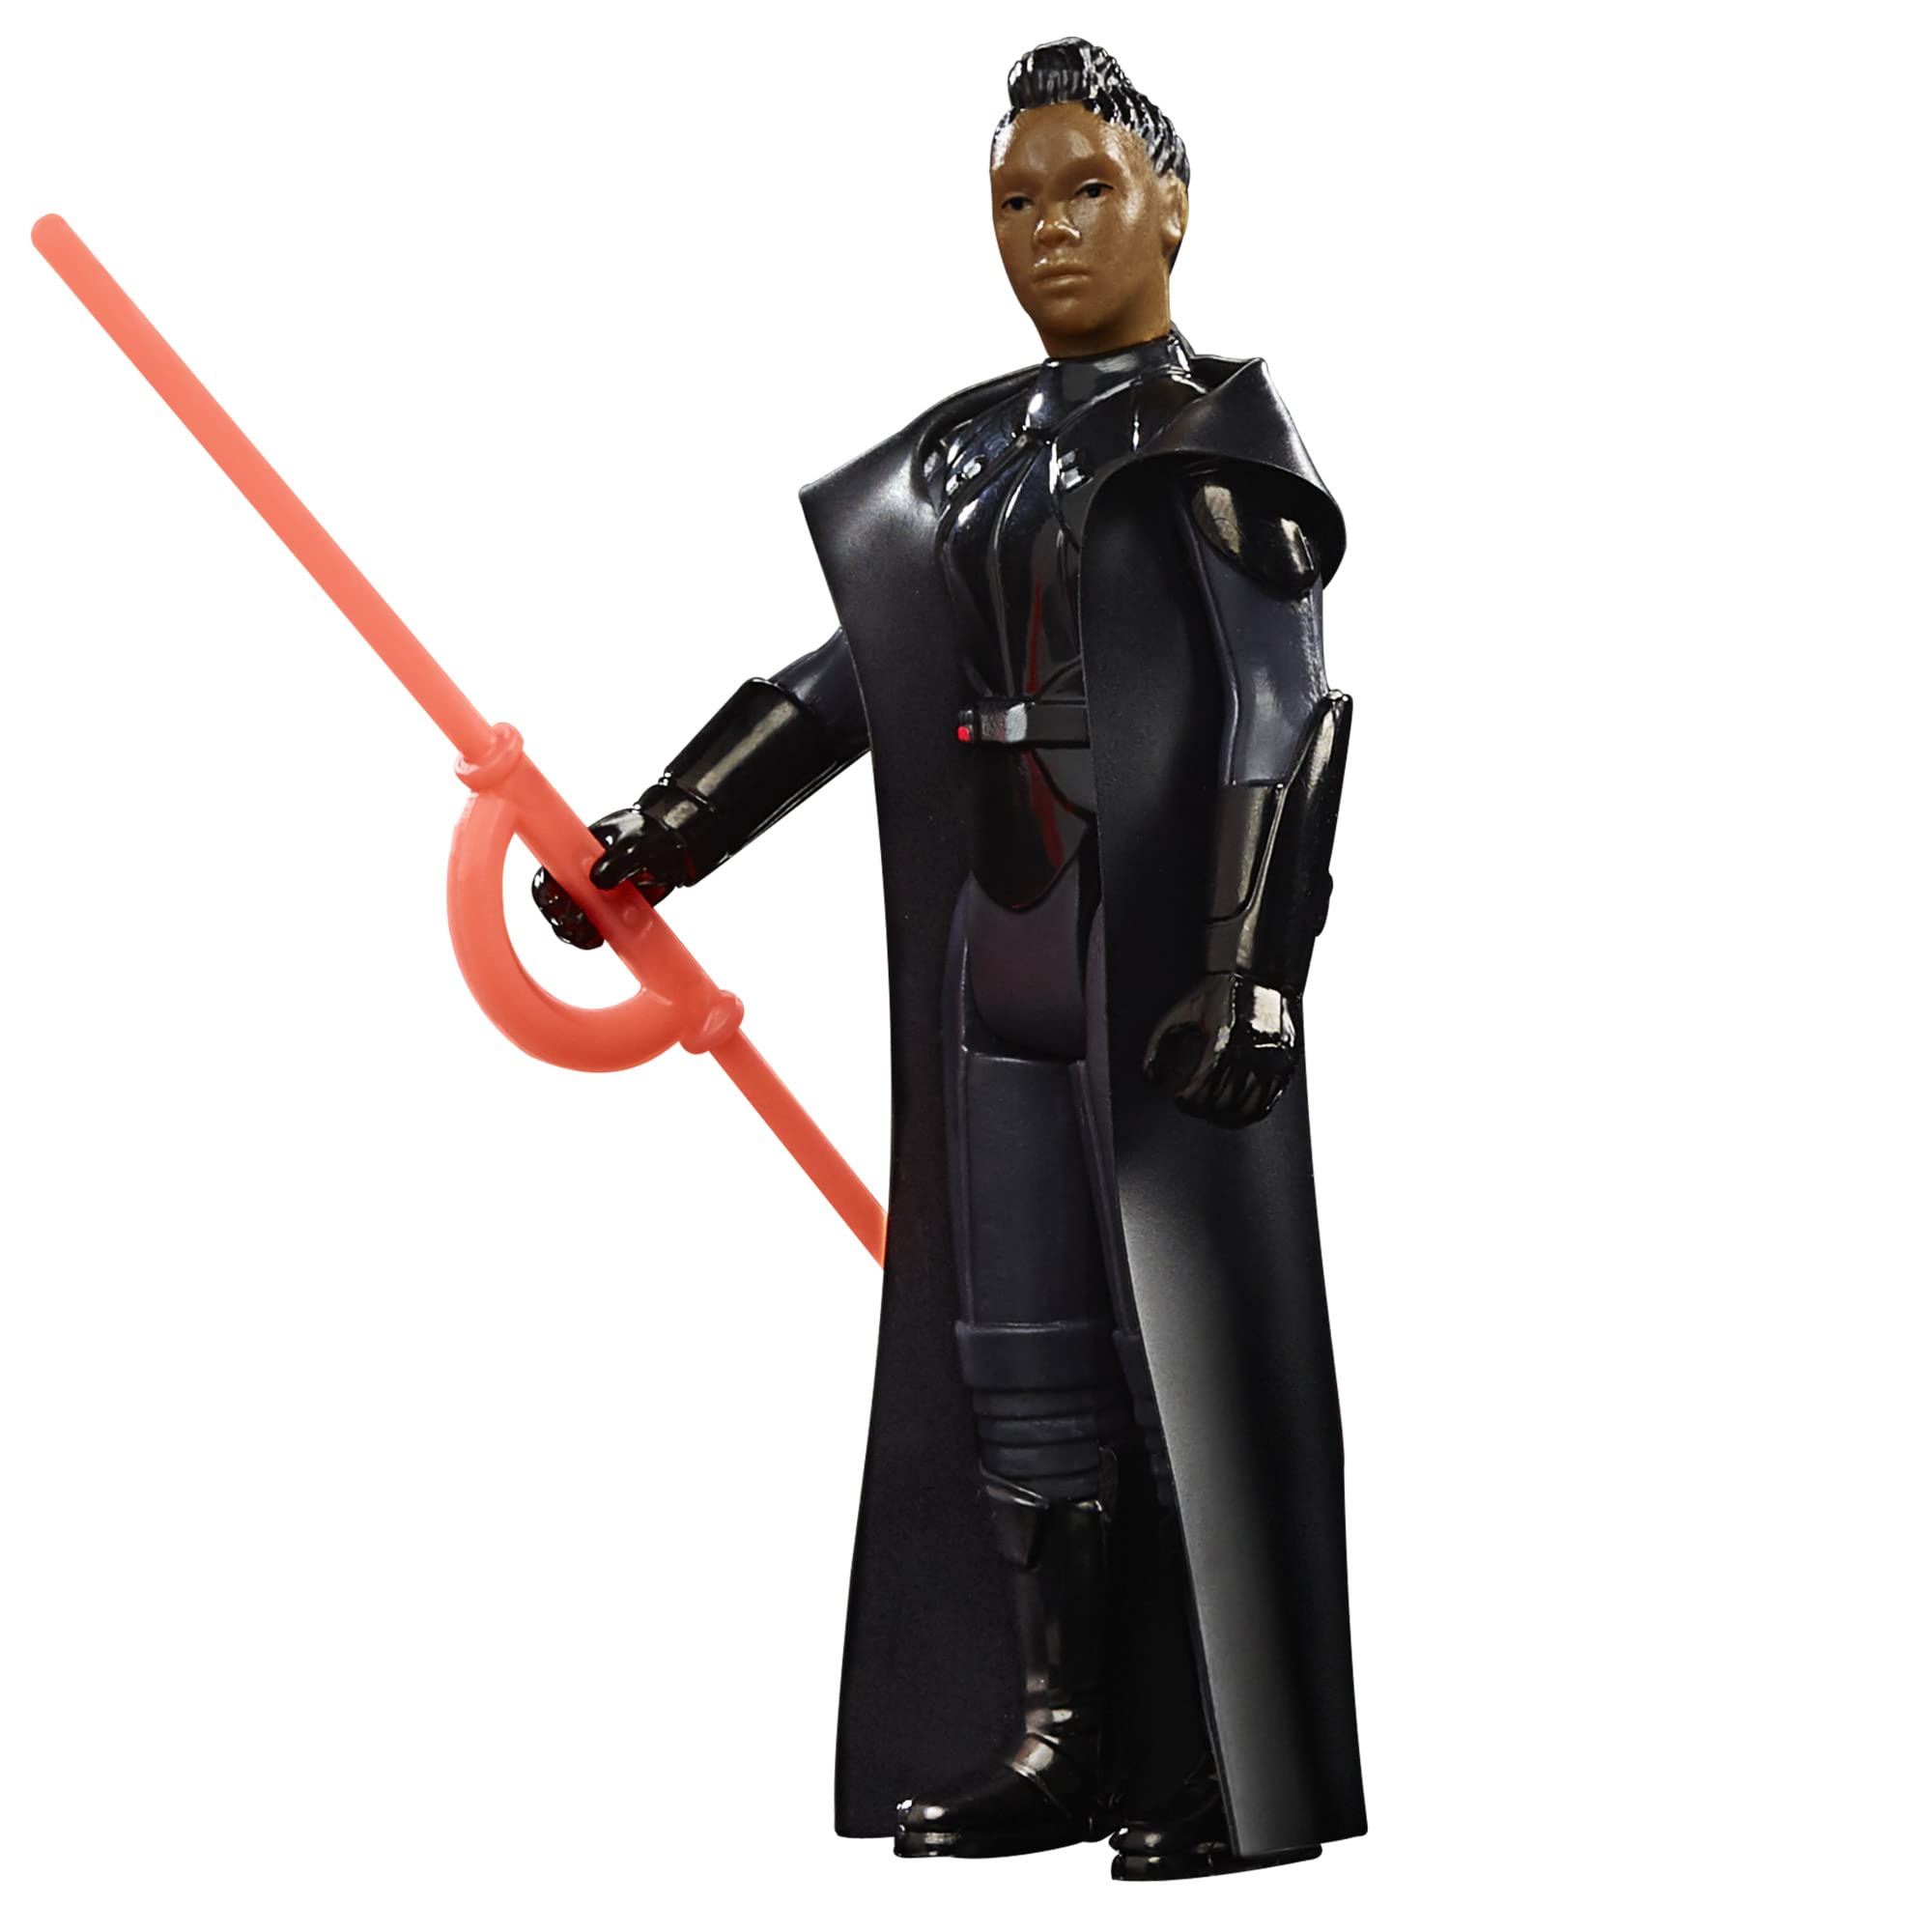 STAR WARS Retro Collection Reva (Third Sister) Toy 3.75-Inch-Scale OBI-Wan Kenobi Action Figure, Toys for Kids Ages 4 and Up